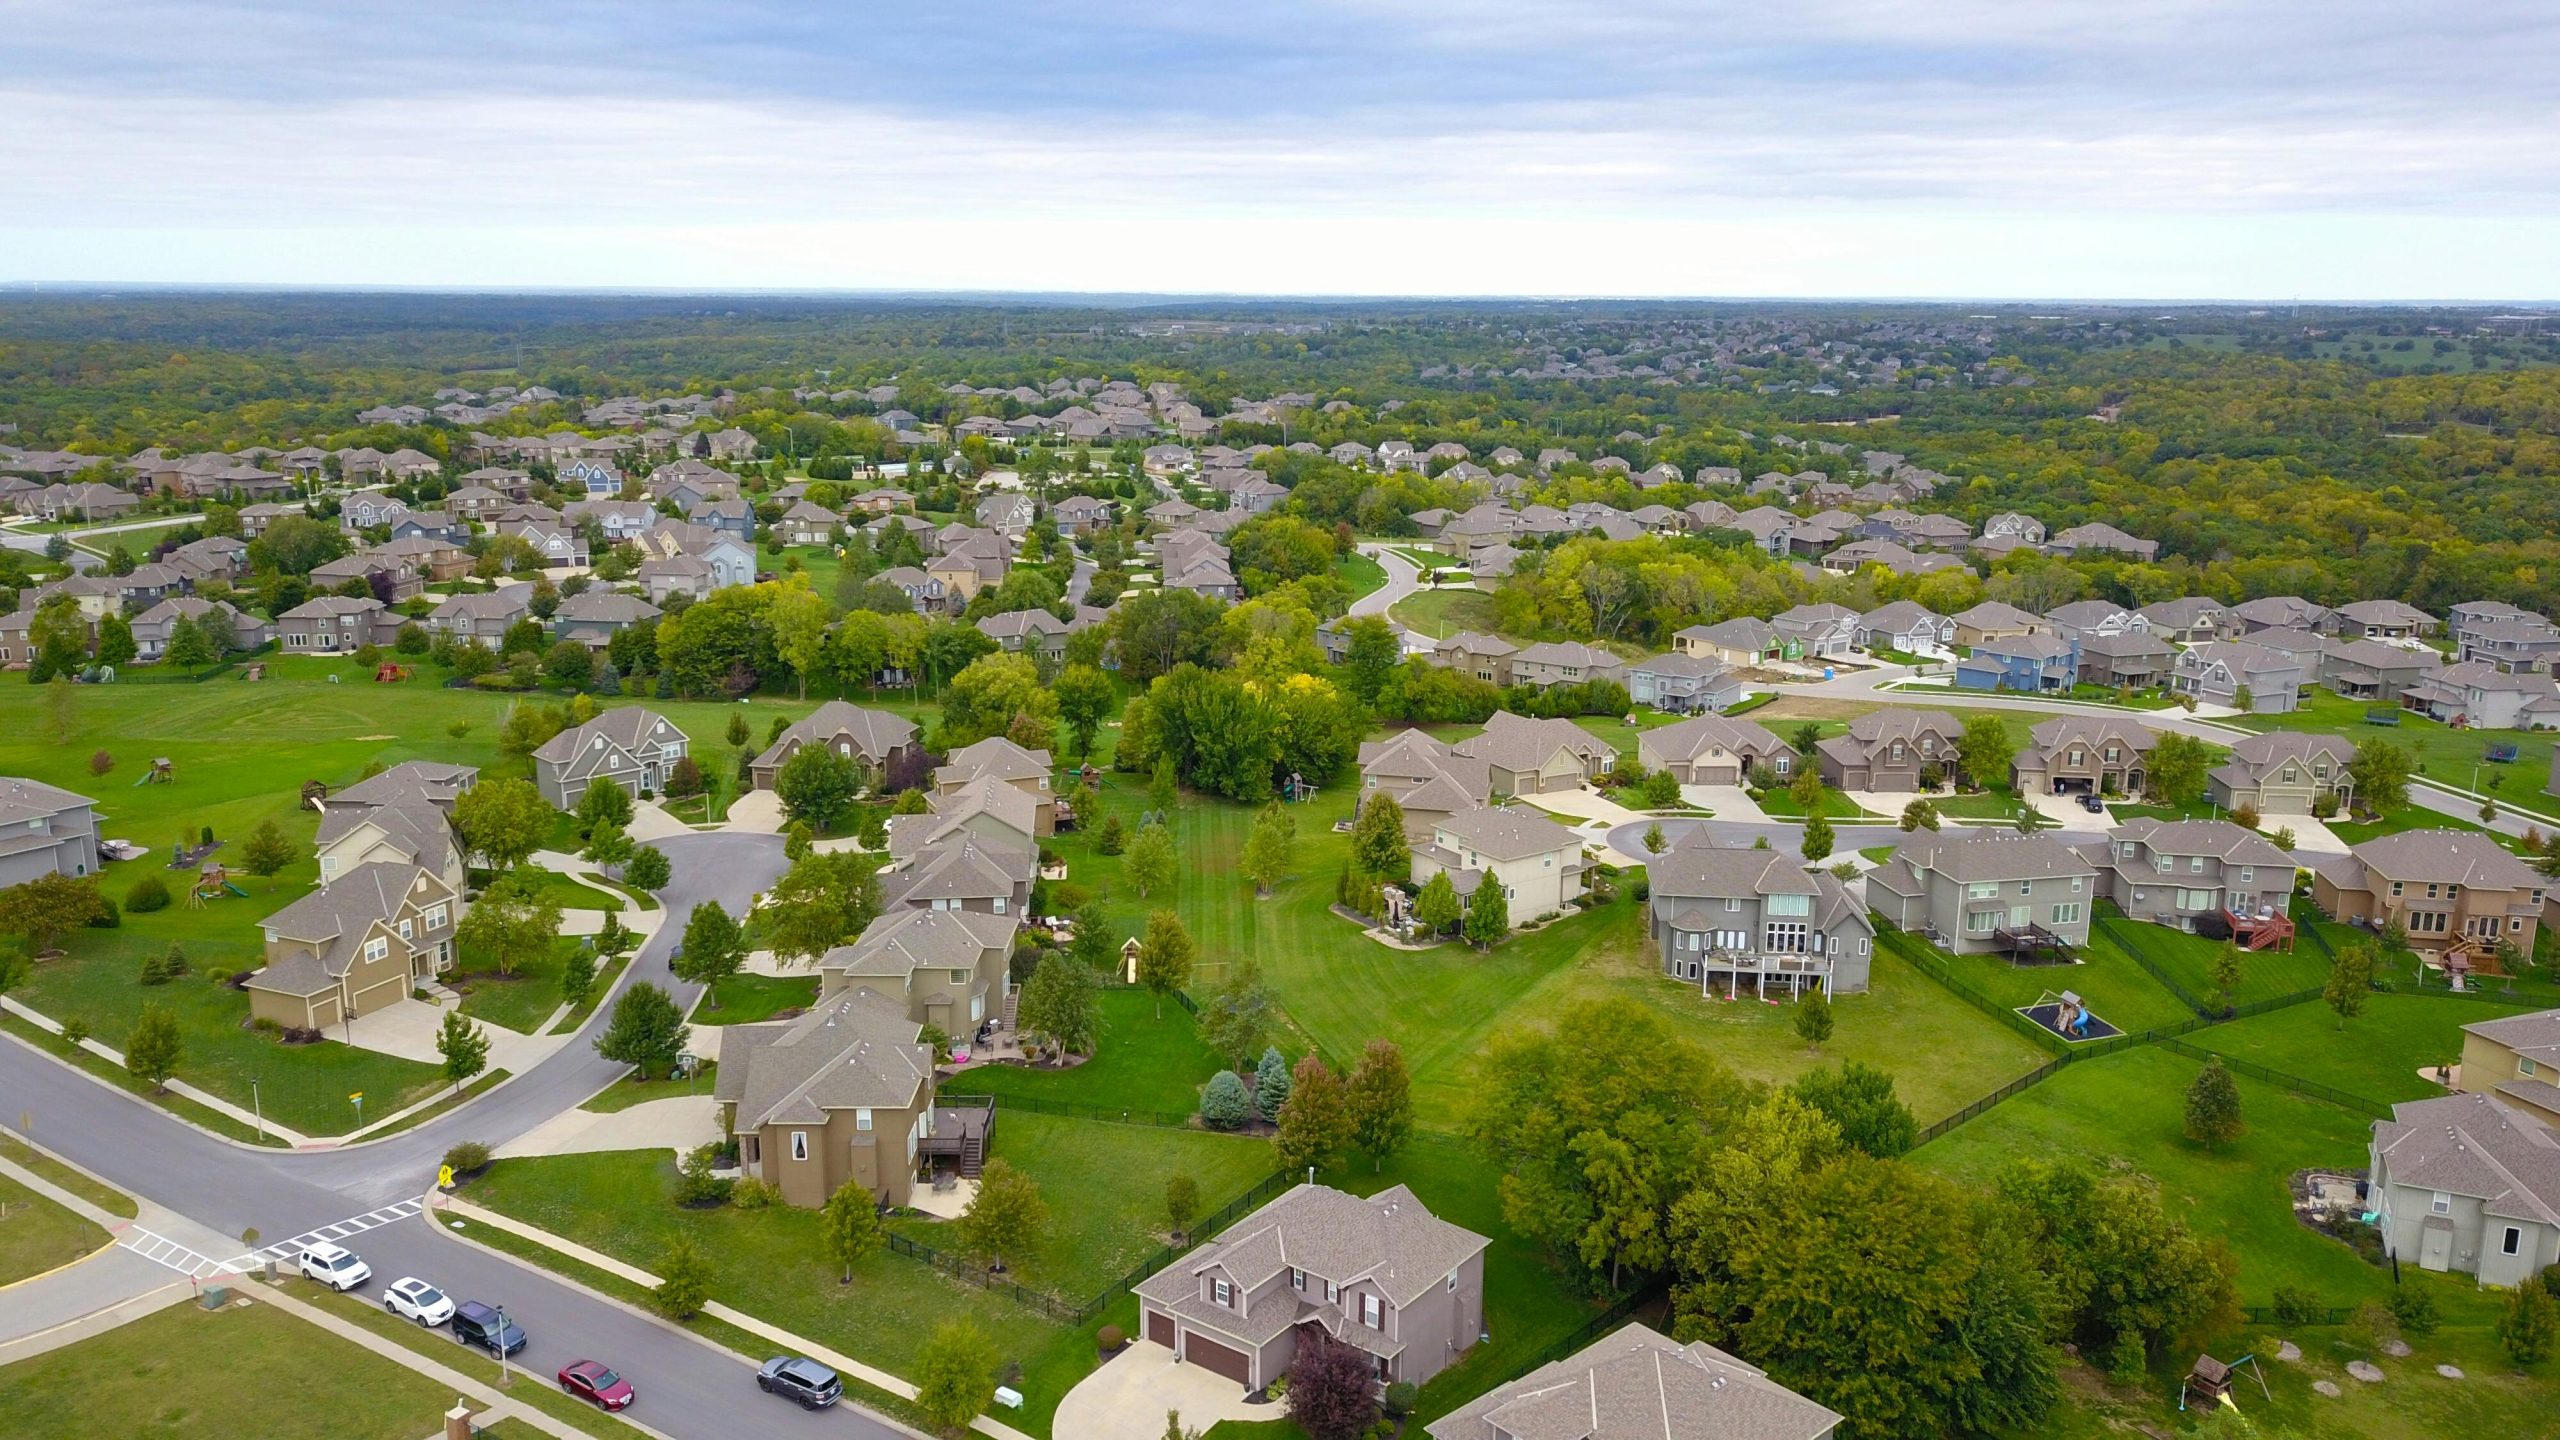 Overhead view of master planned communities - Atlantic Foundation